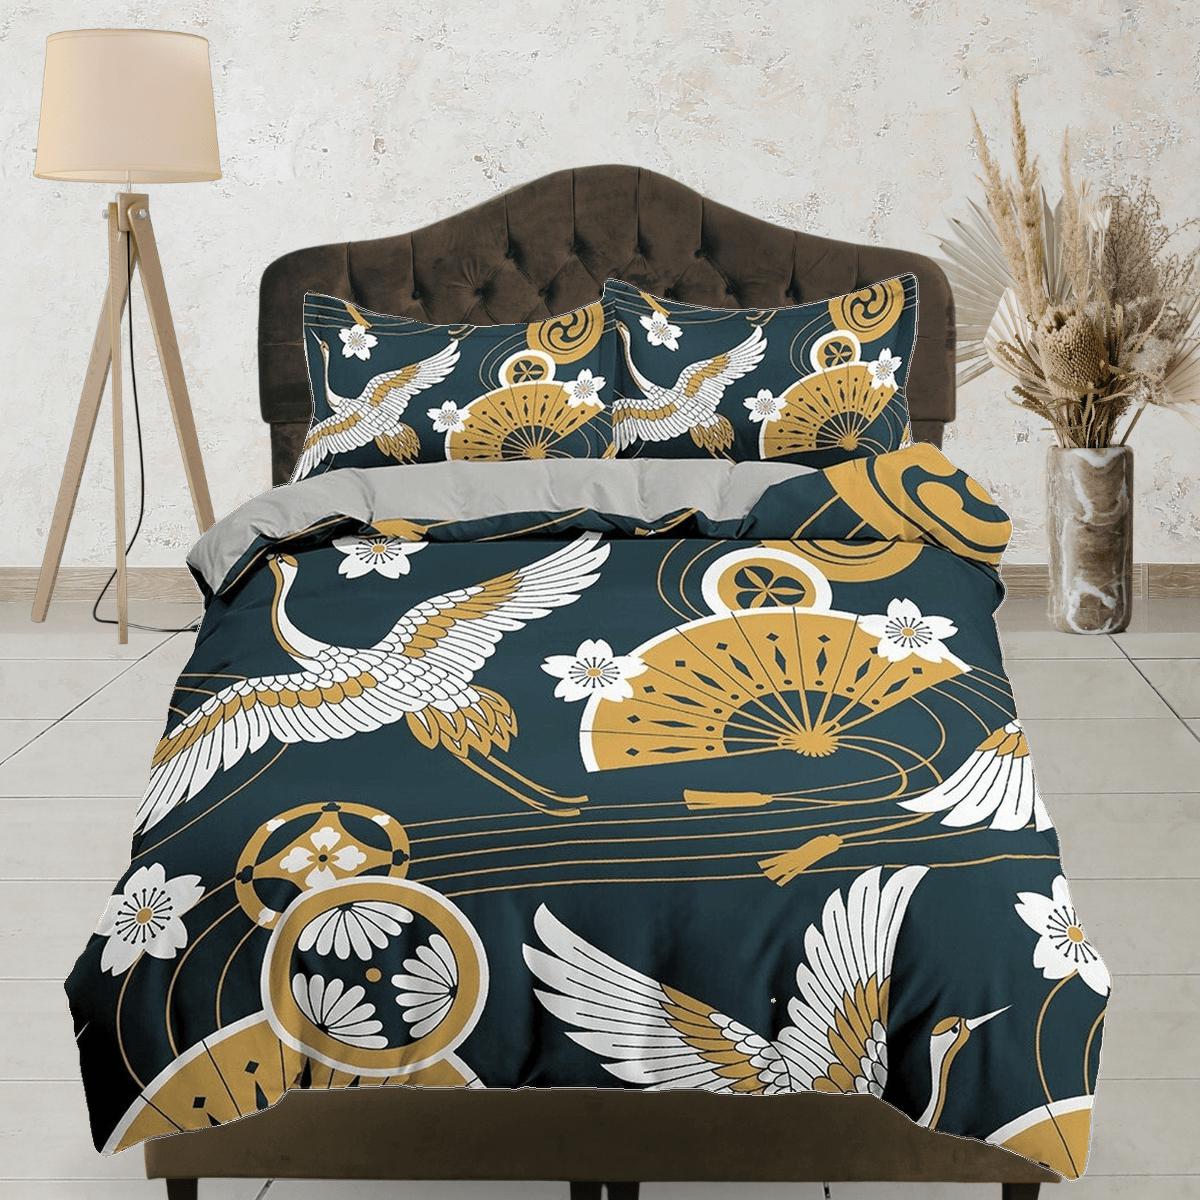 daintyduvet Dark green oriental duvet cover set, crane bird, fan and cherry blossom floral printed Japanese style bedding, king, queen, full, twin